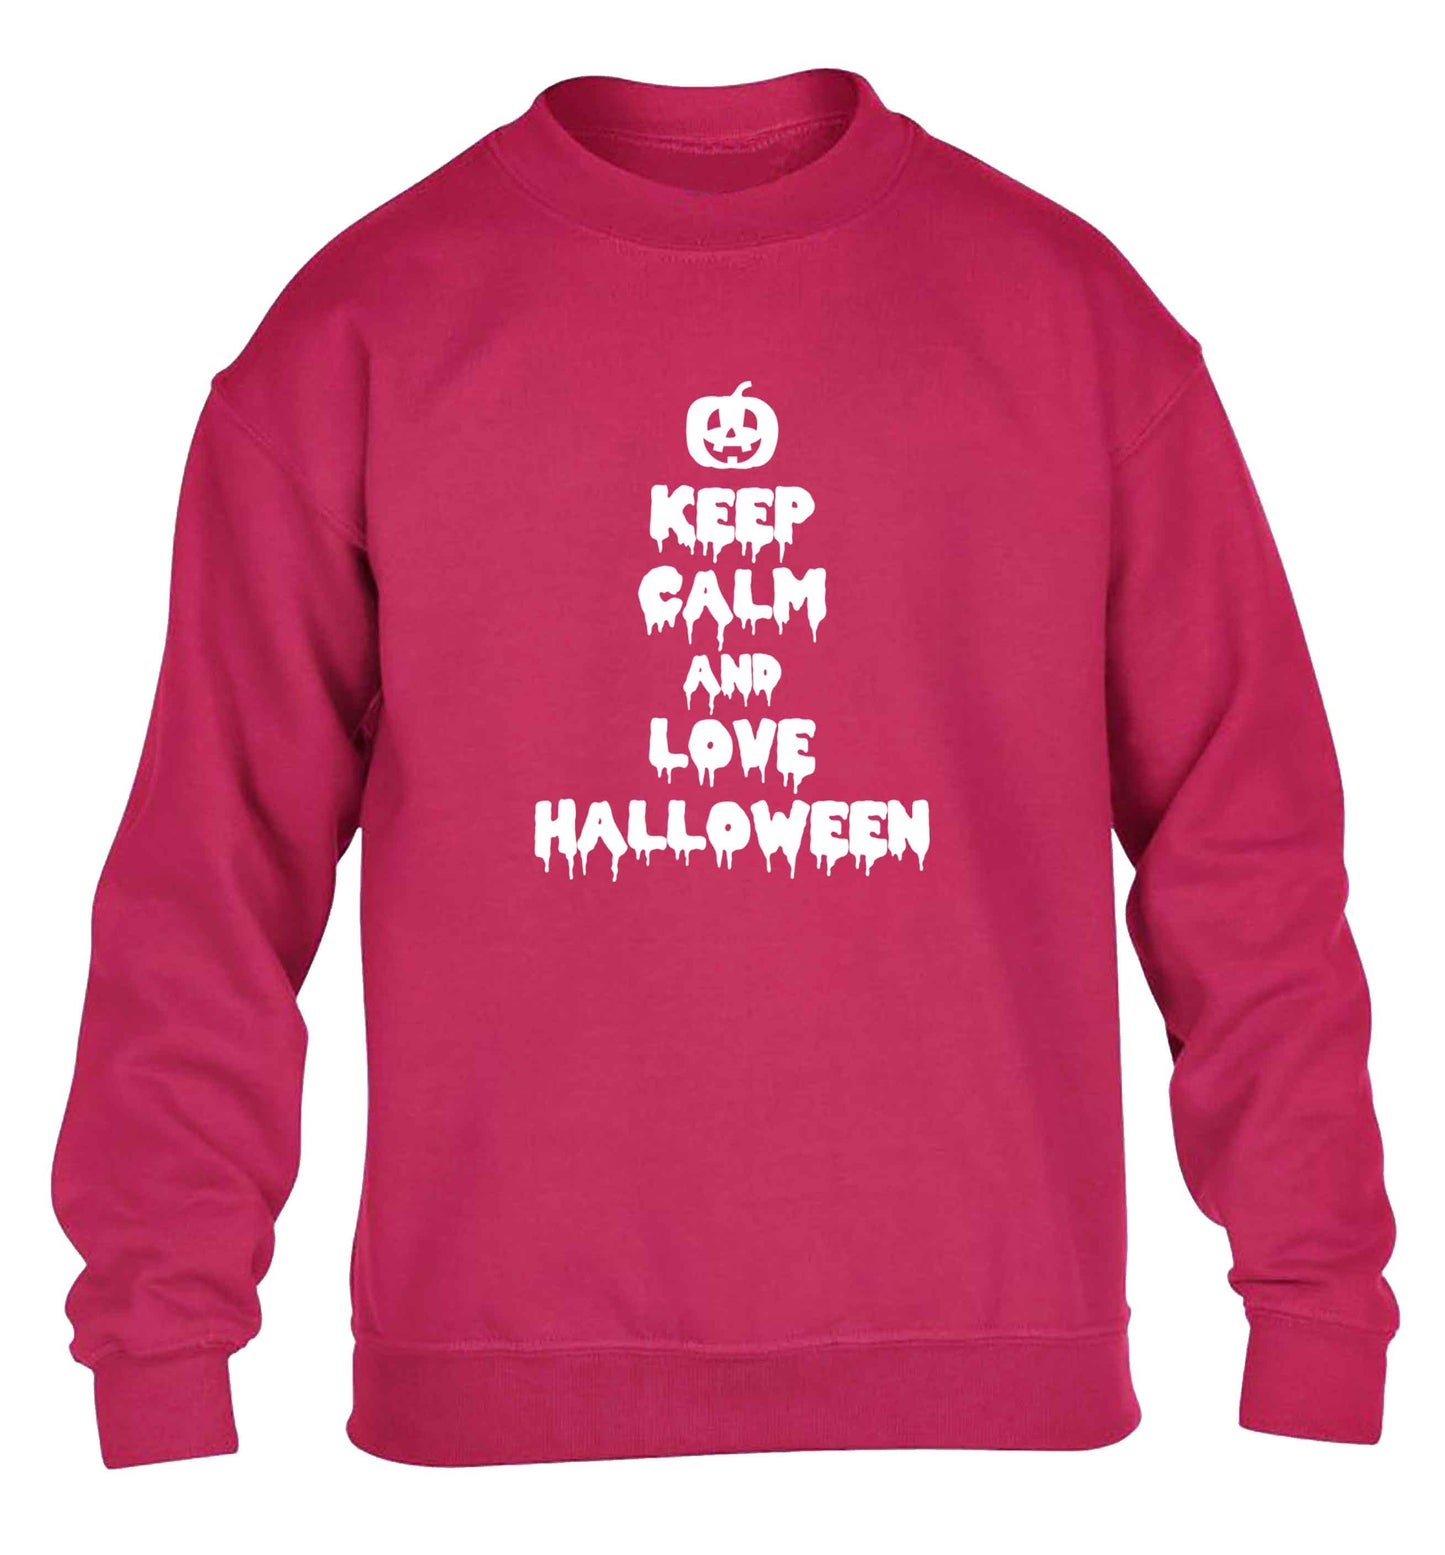 Keep calm and love halloween children's pink sweater 12-13 Years